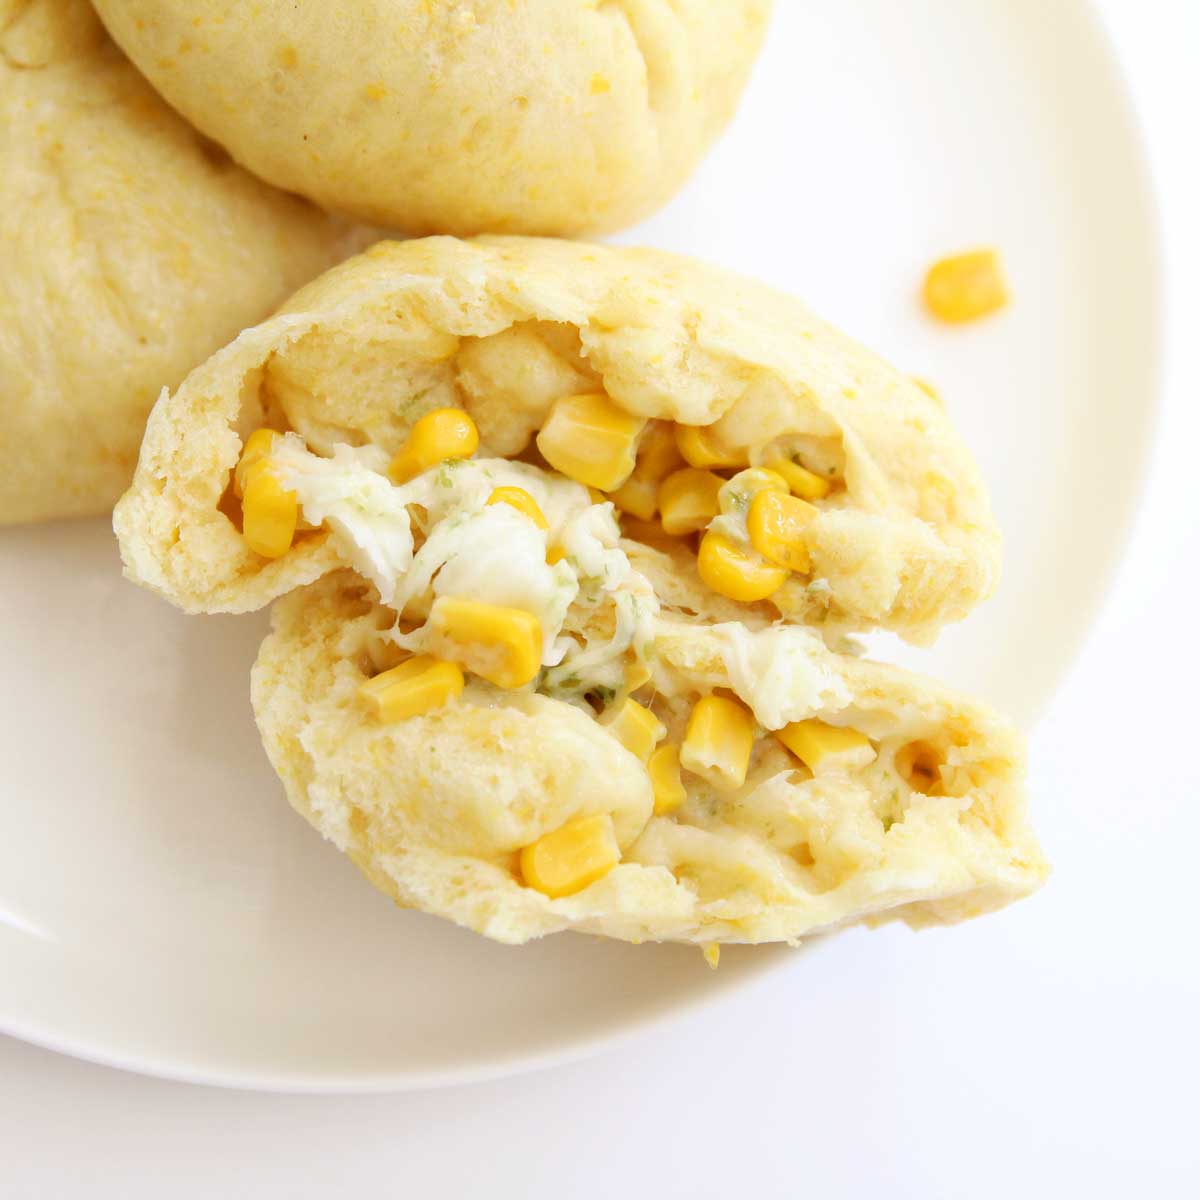 Savory "Cornbread" Steamed Buns with a Korean Cheese Corn Filling - naan pizza